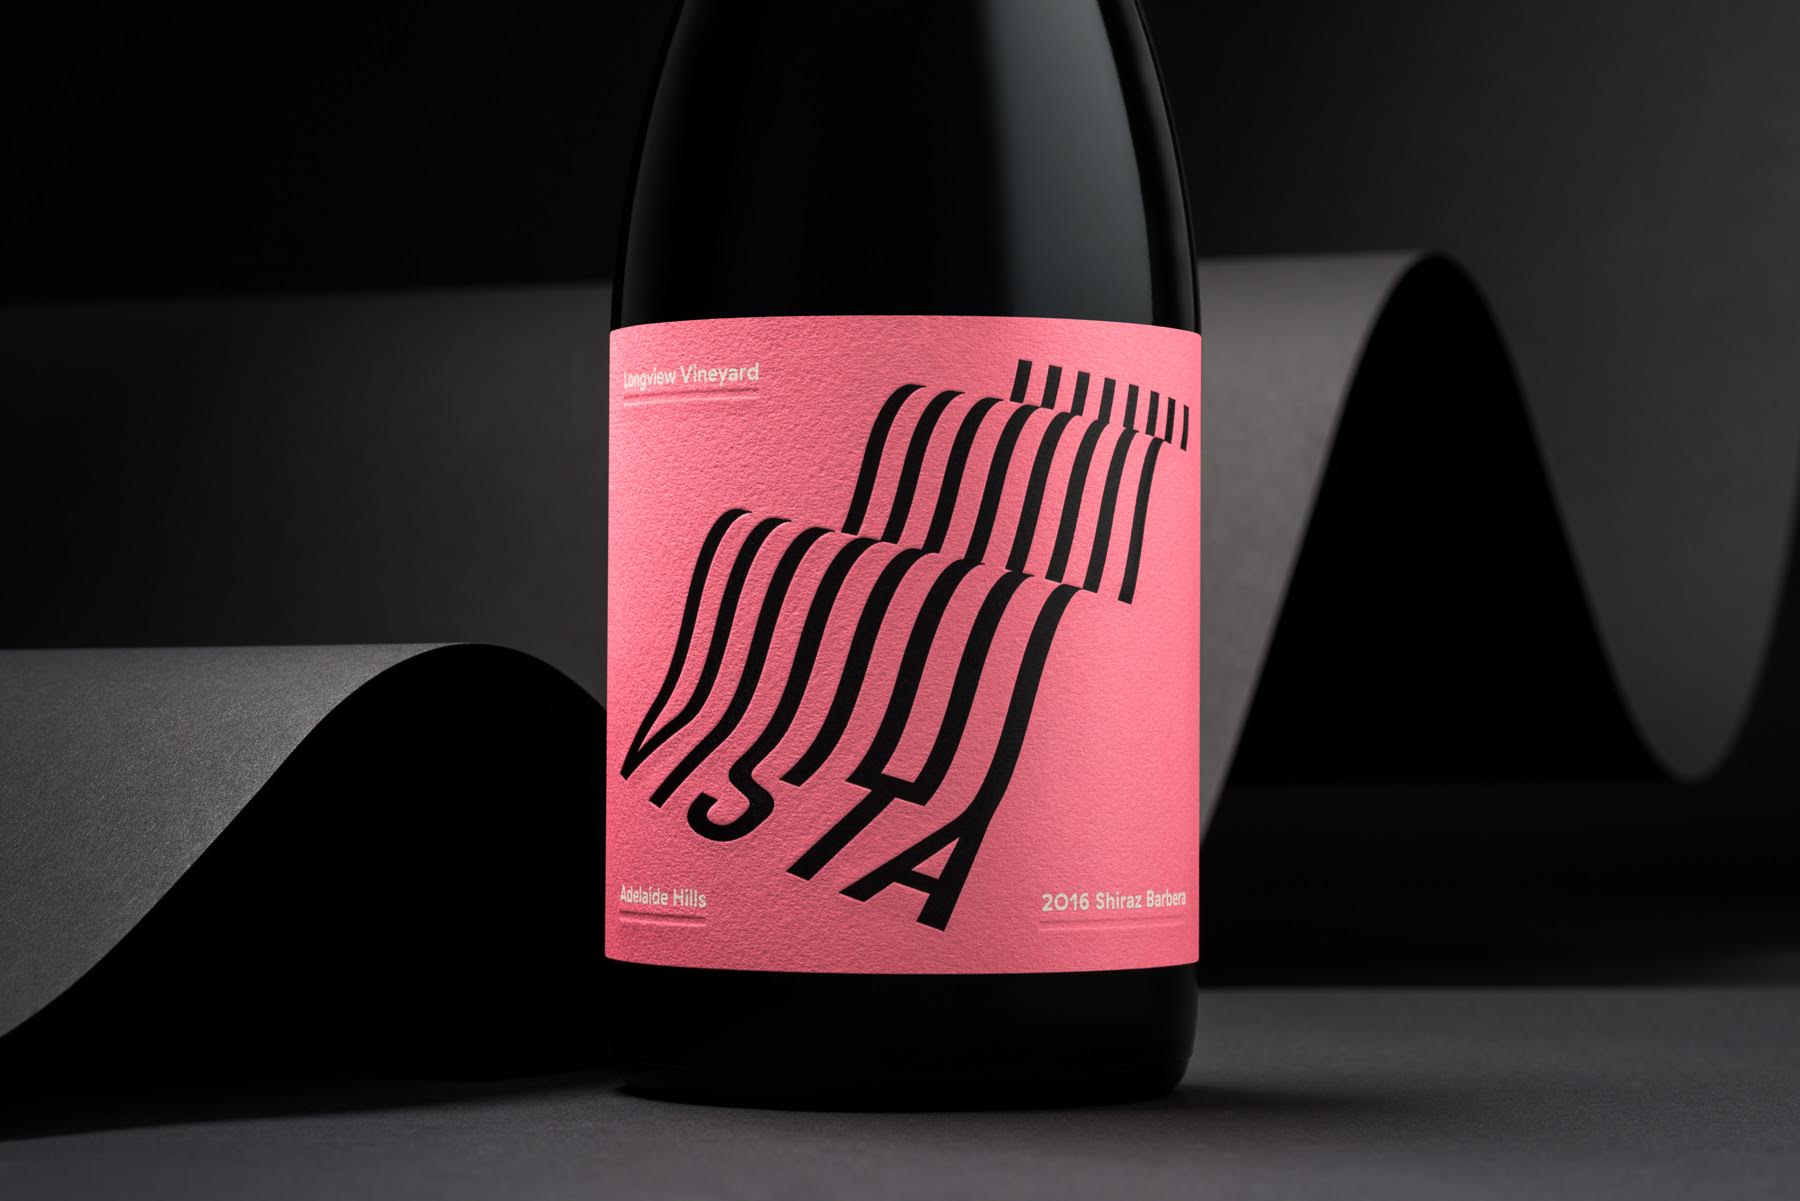 A Typographical Label Design Rolling Landscapes, Graphic Contours of Rows of Vines